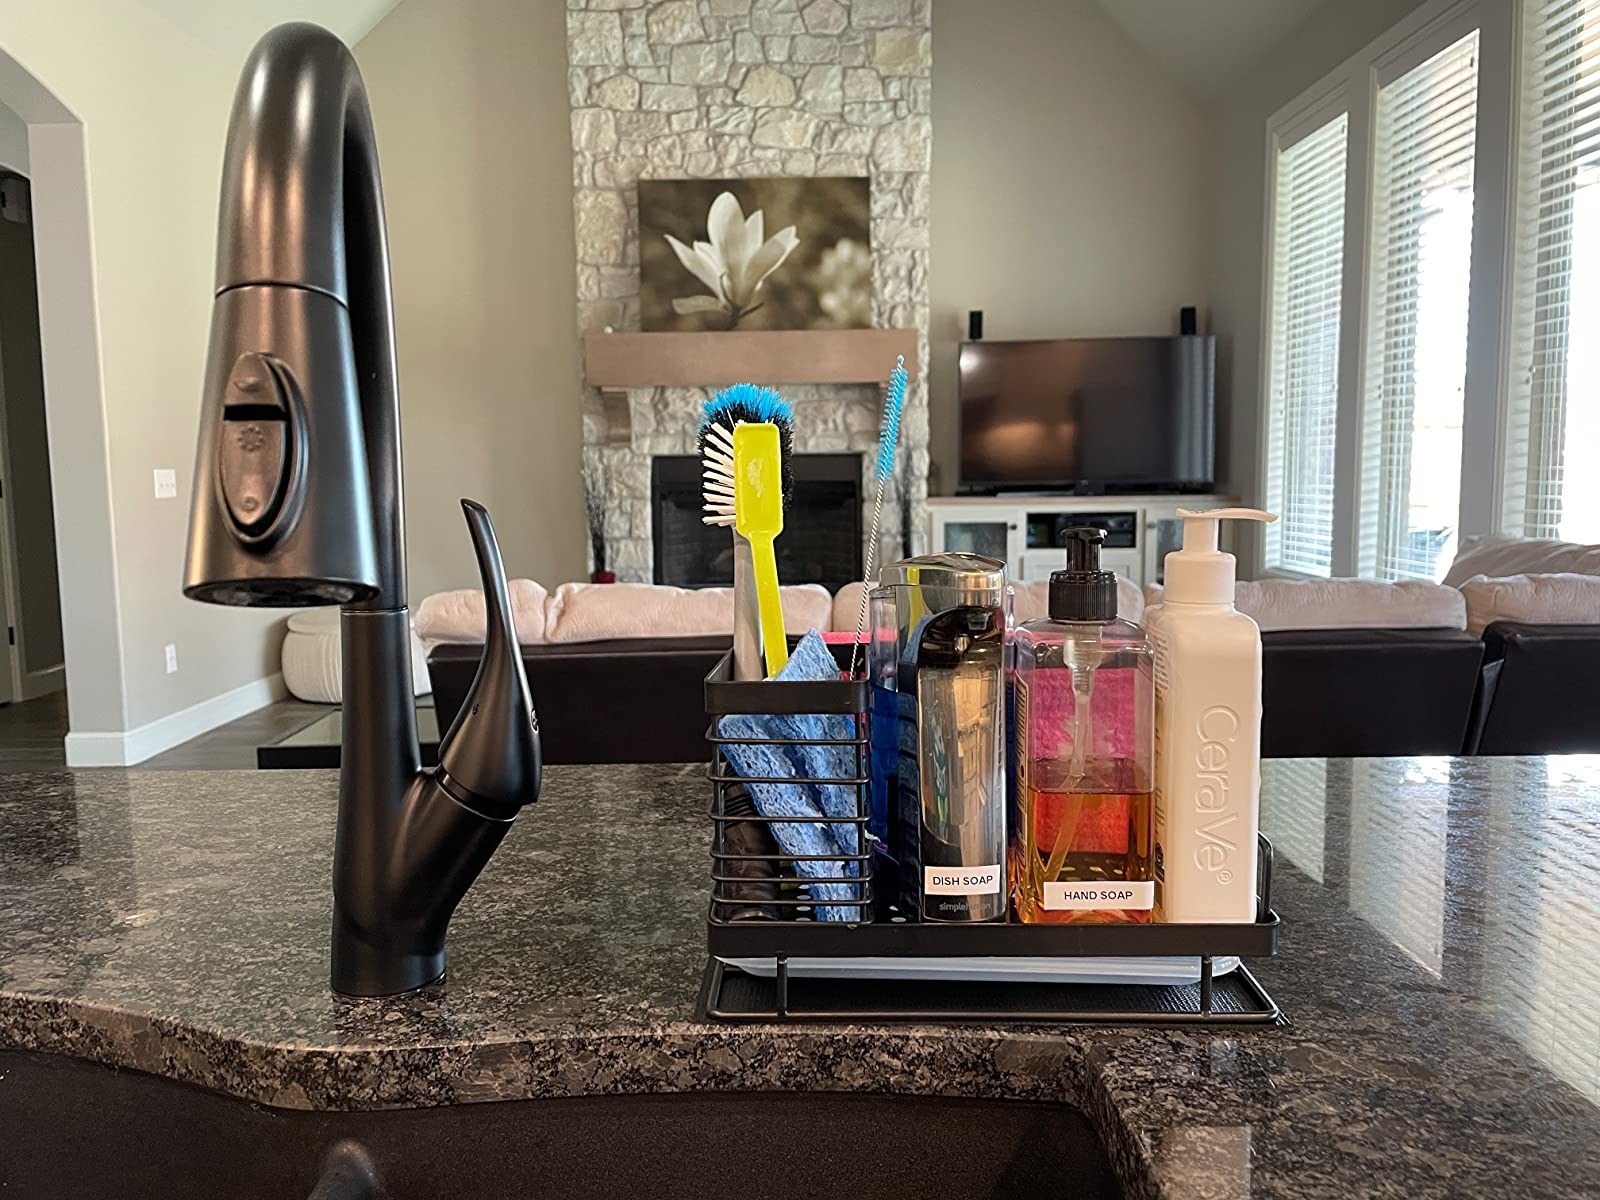 reviewer photo of the black sink organizer next to faucet filled with soap, sponges, etc.